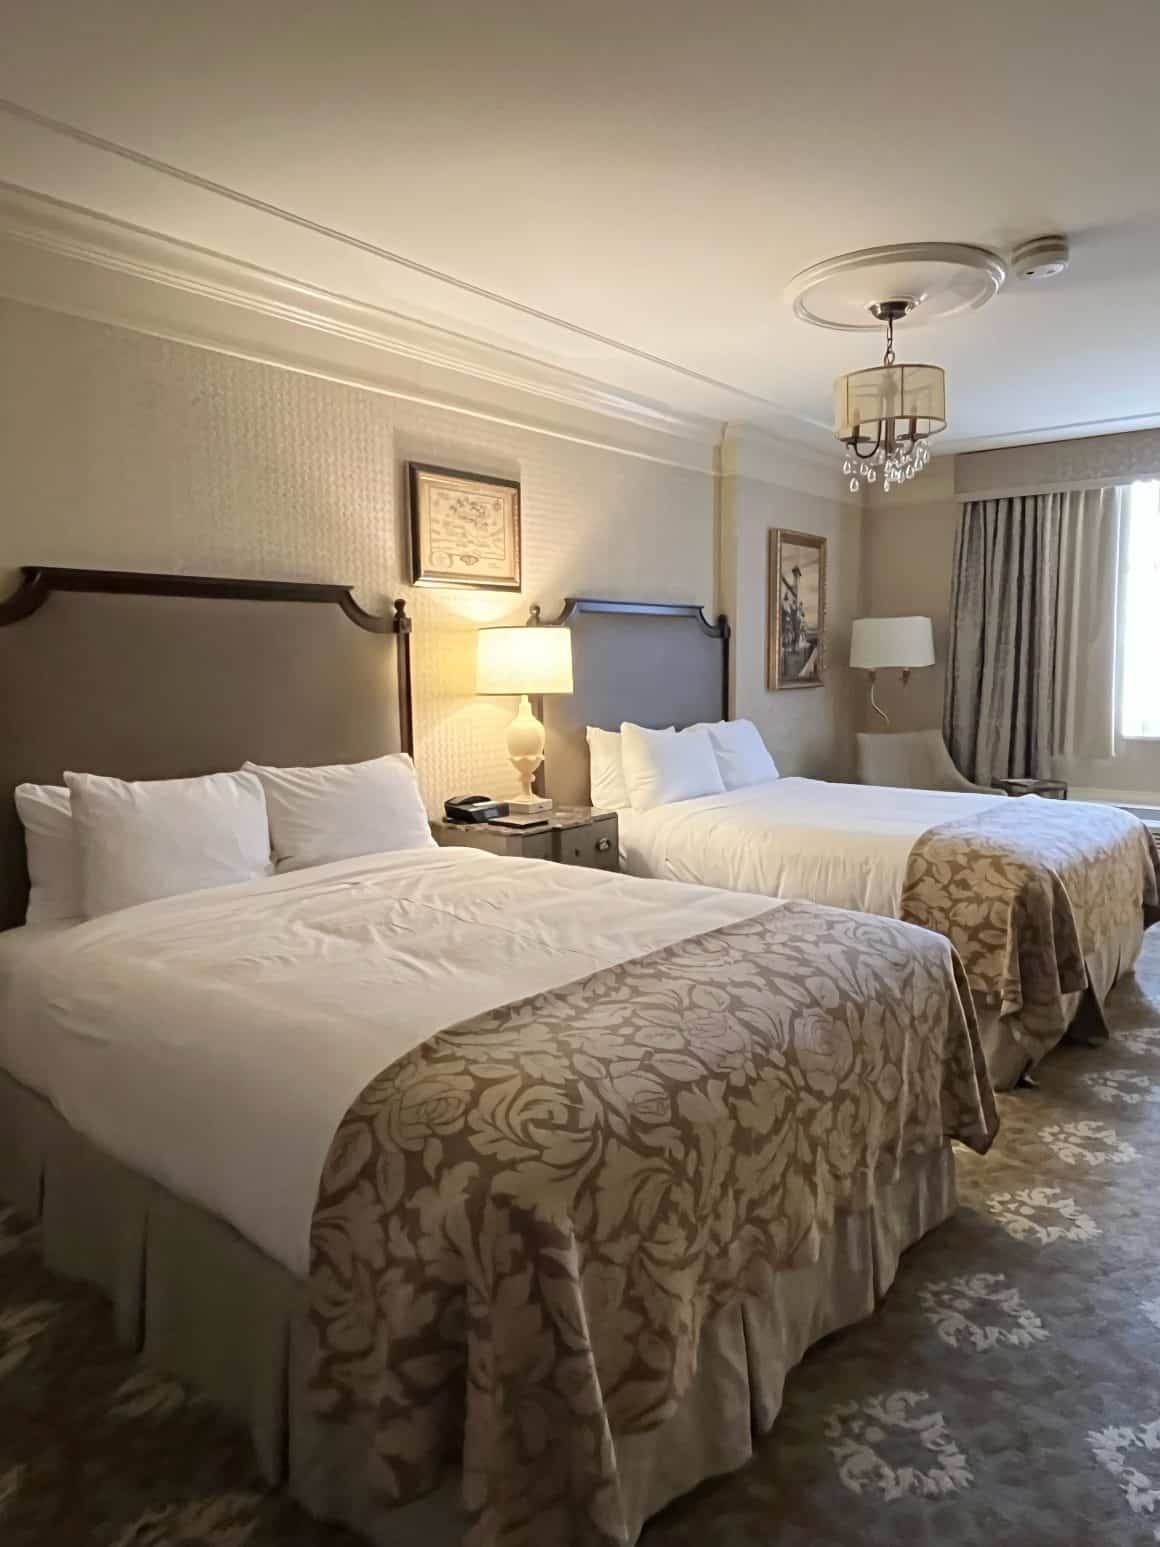 The Hershey Hotel guest rooms